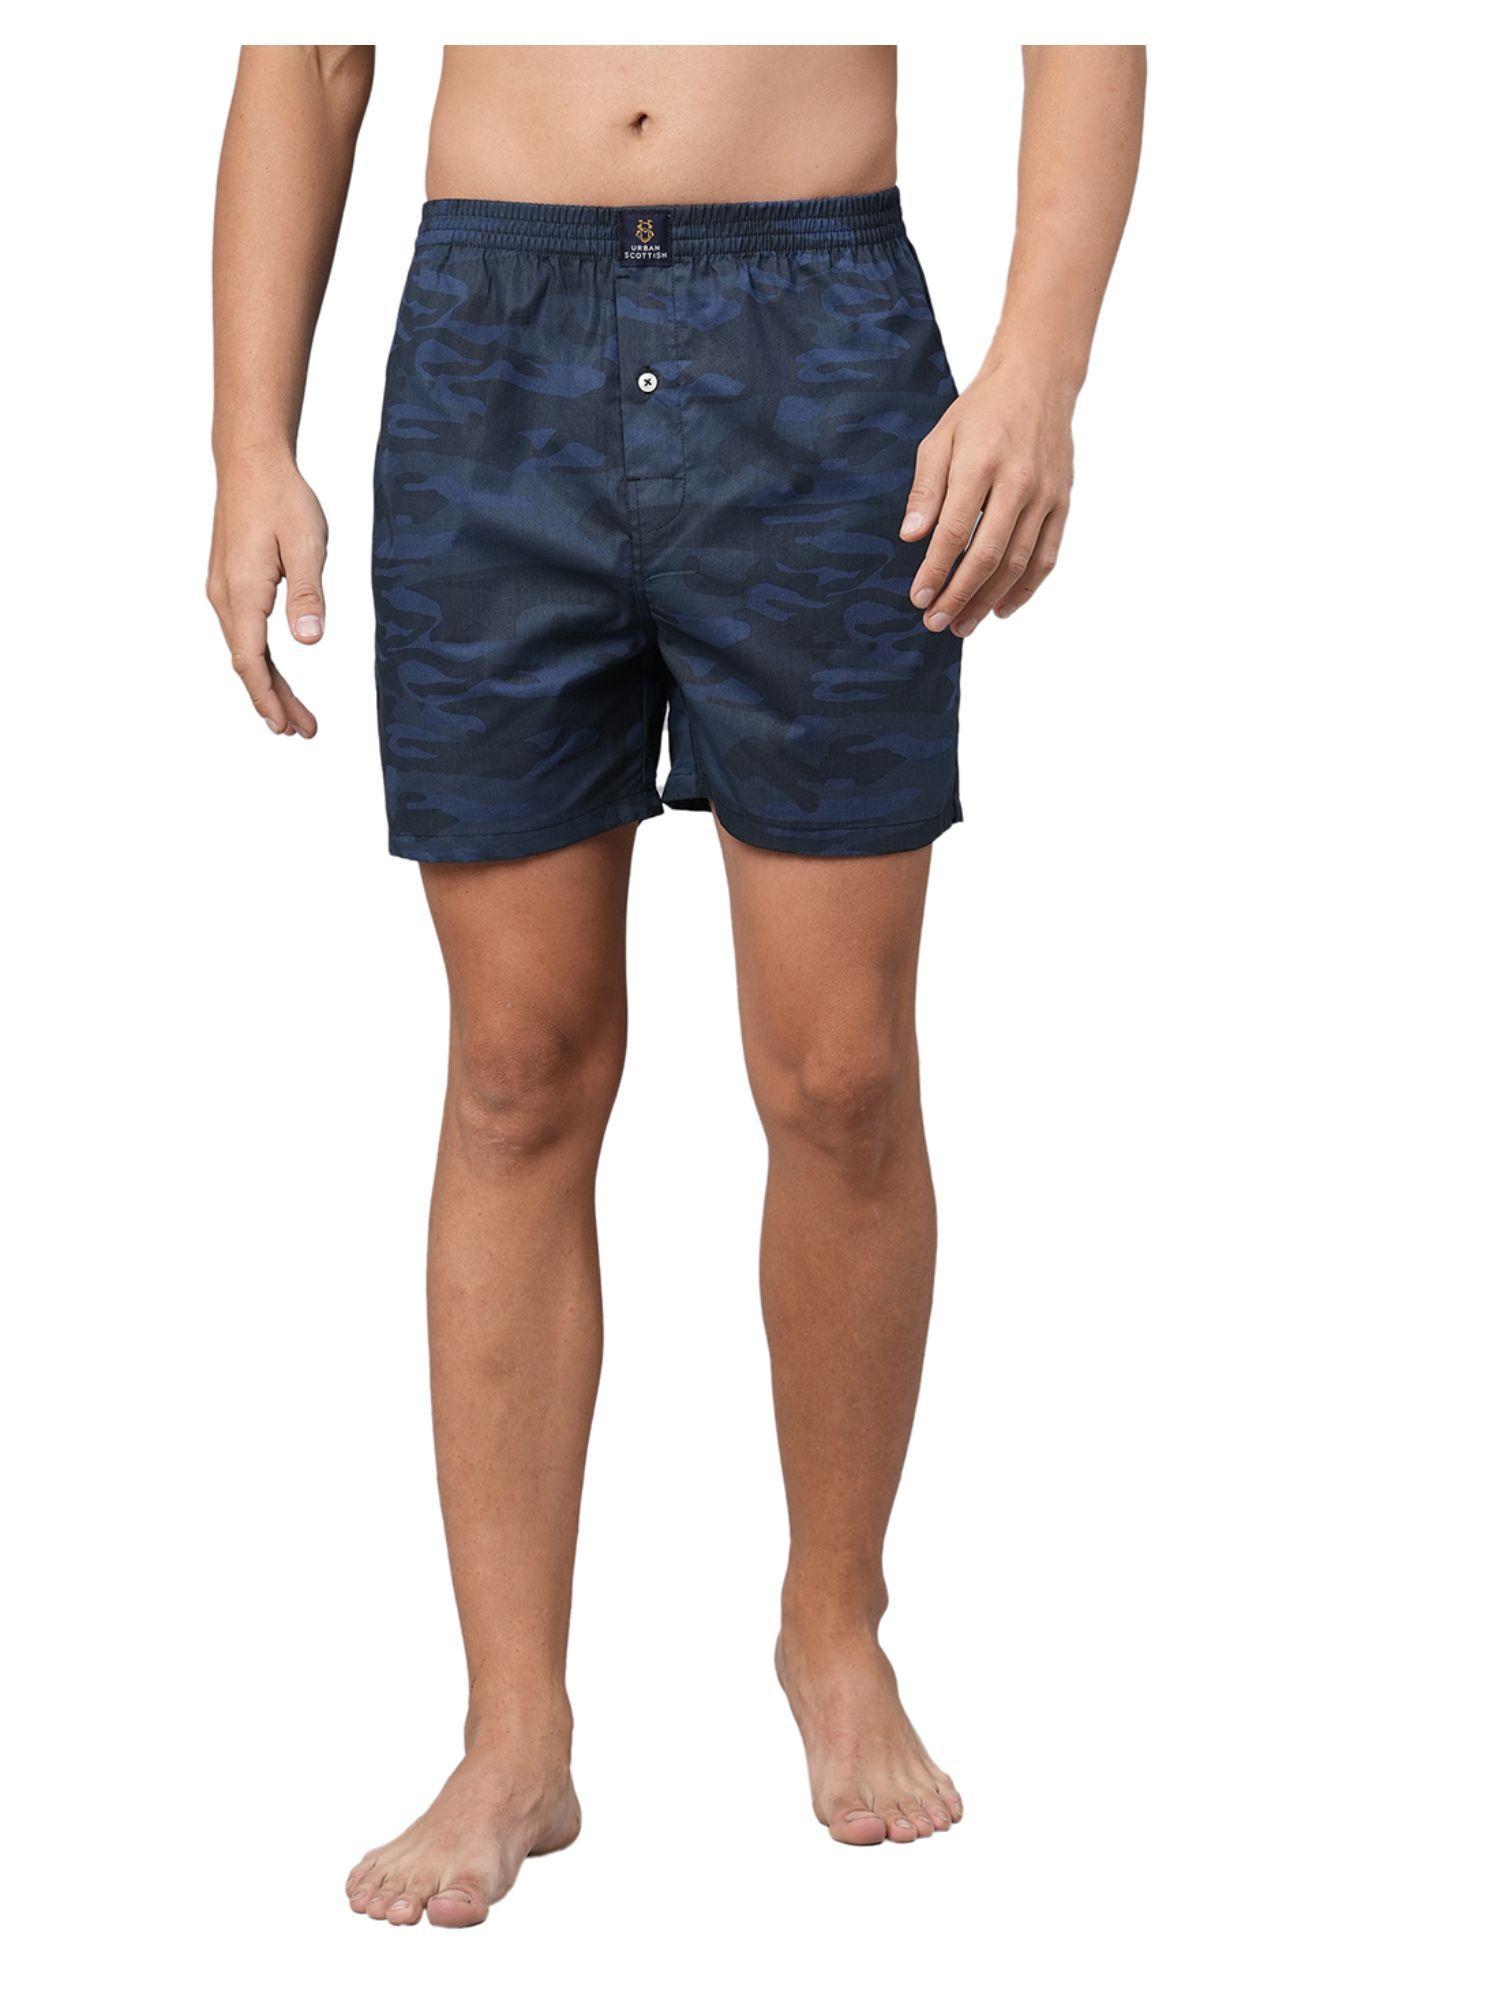 men relaxed navy blue camouflage boxer shorts